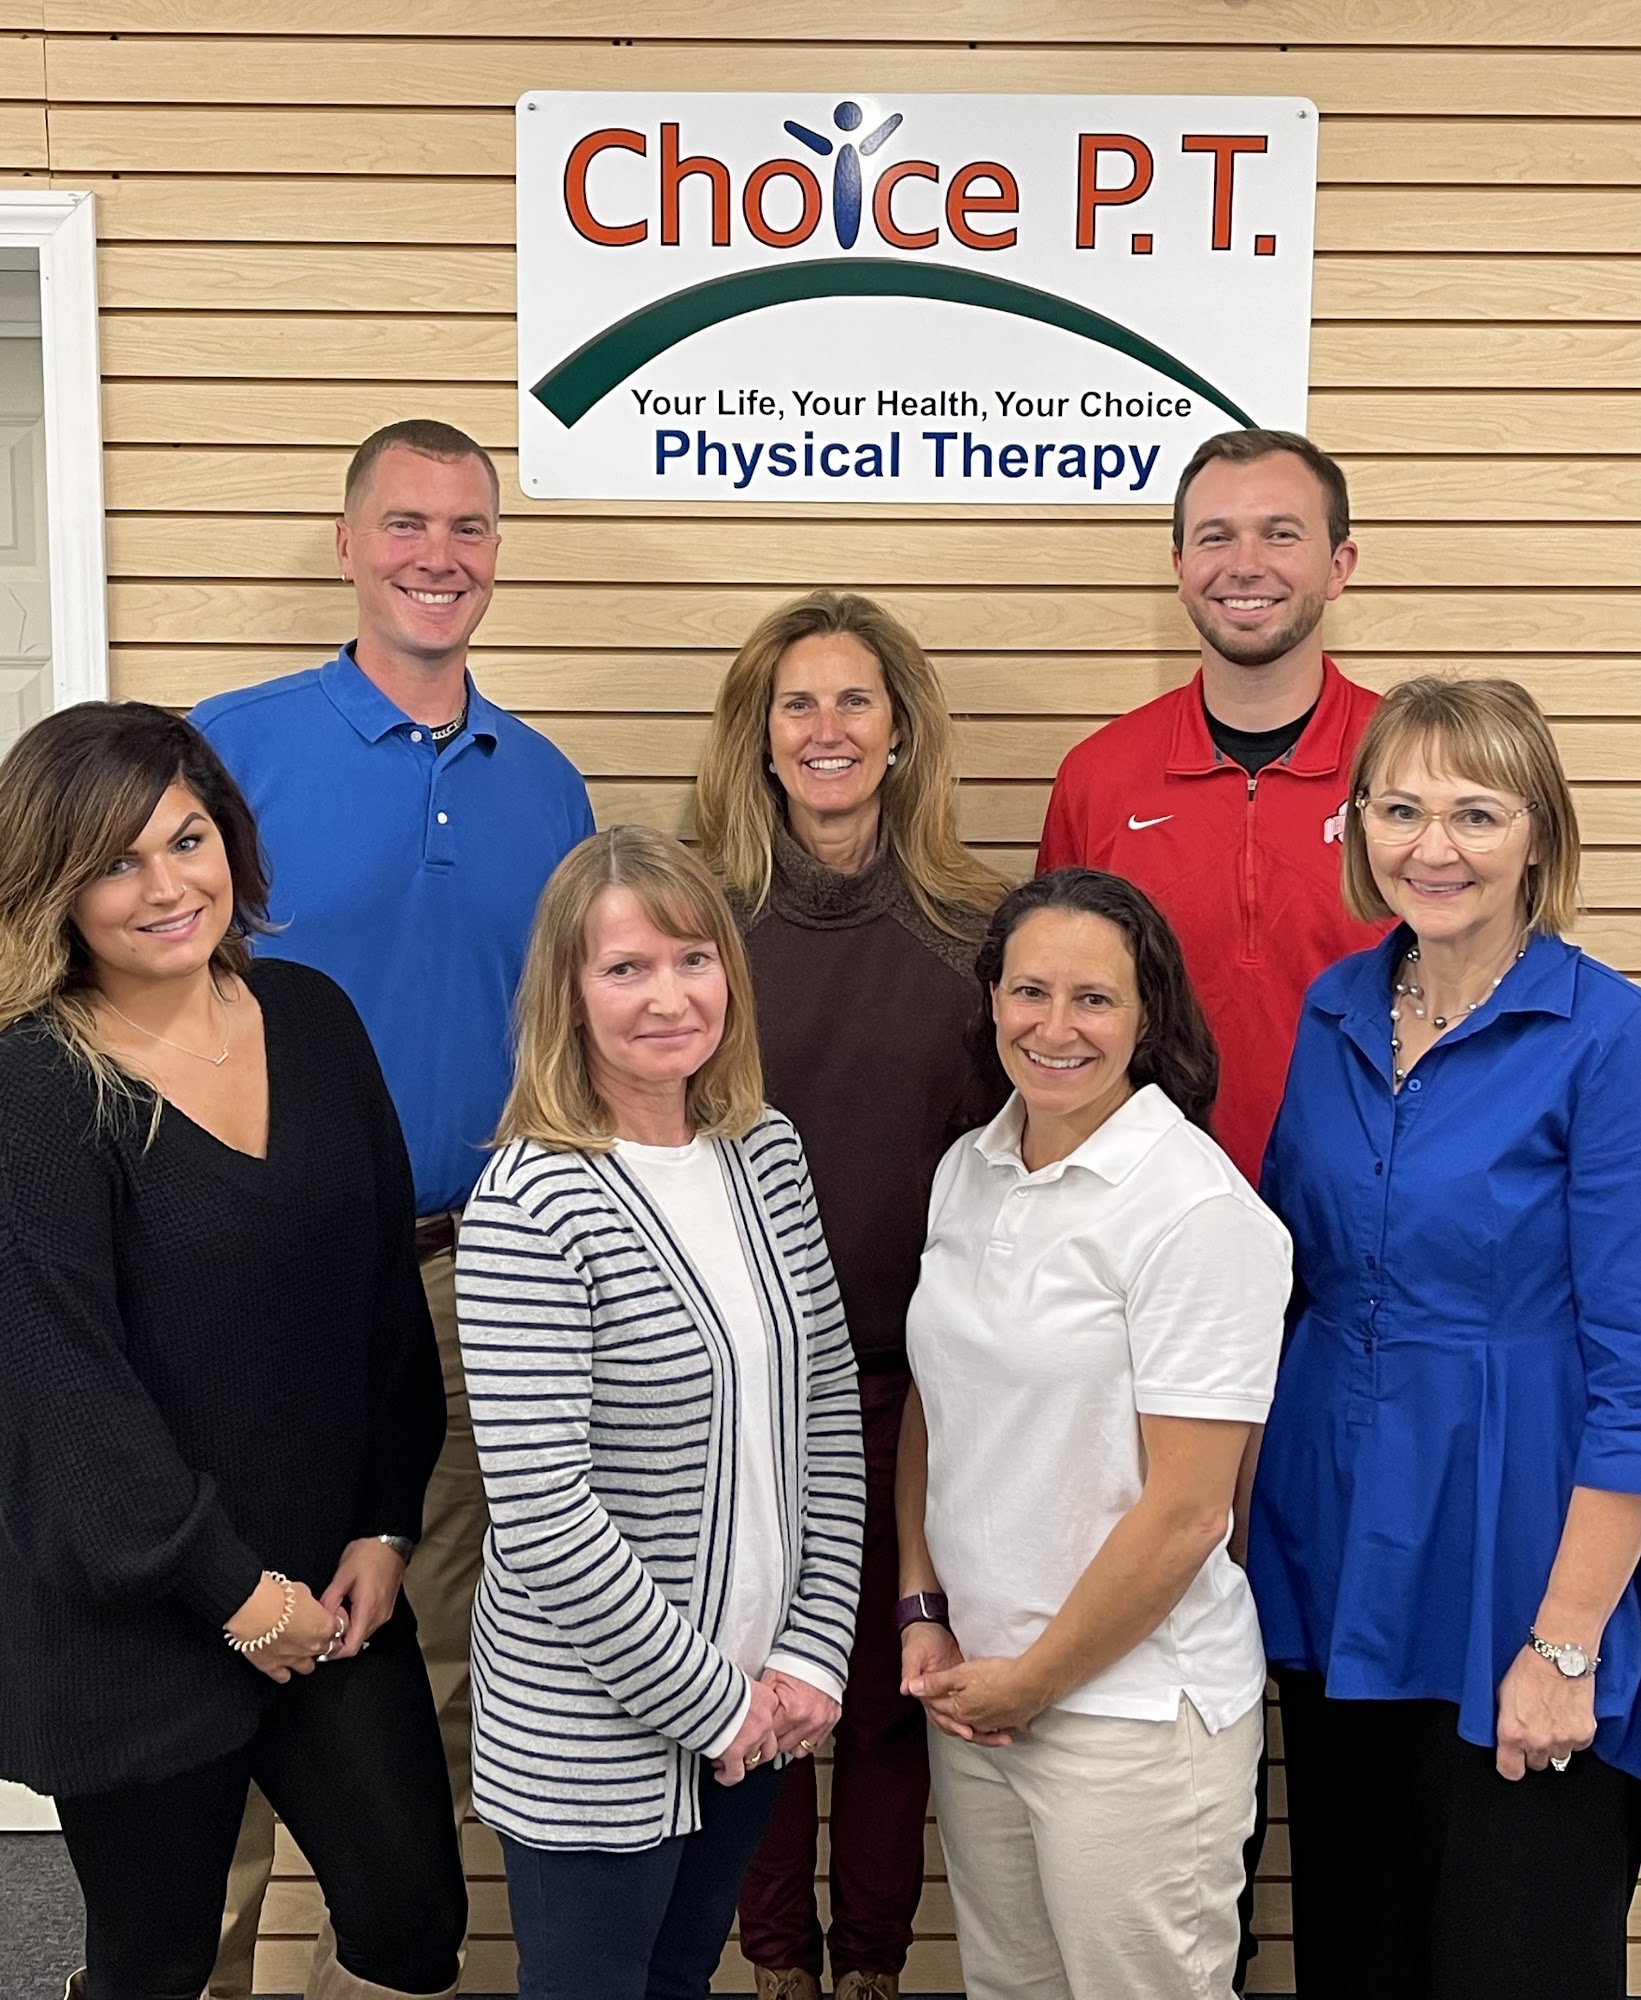 Choice Physical Therapy 133 W Main St, Spencer Massachusetts 01562